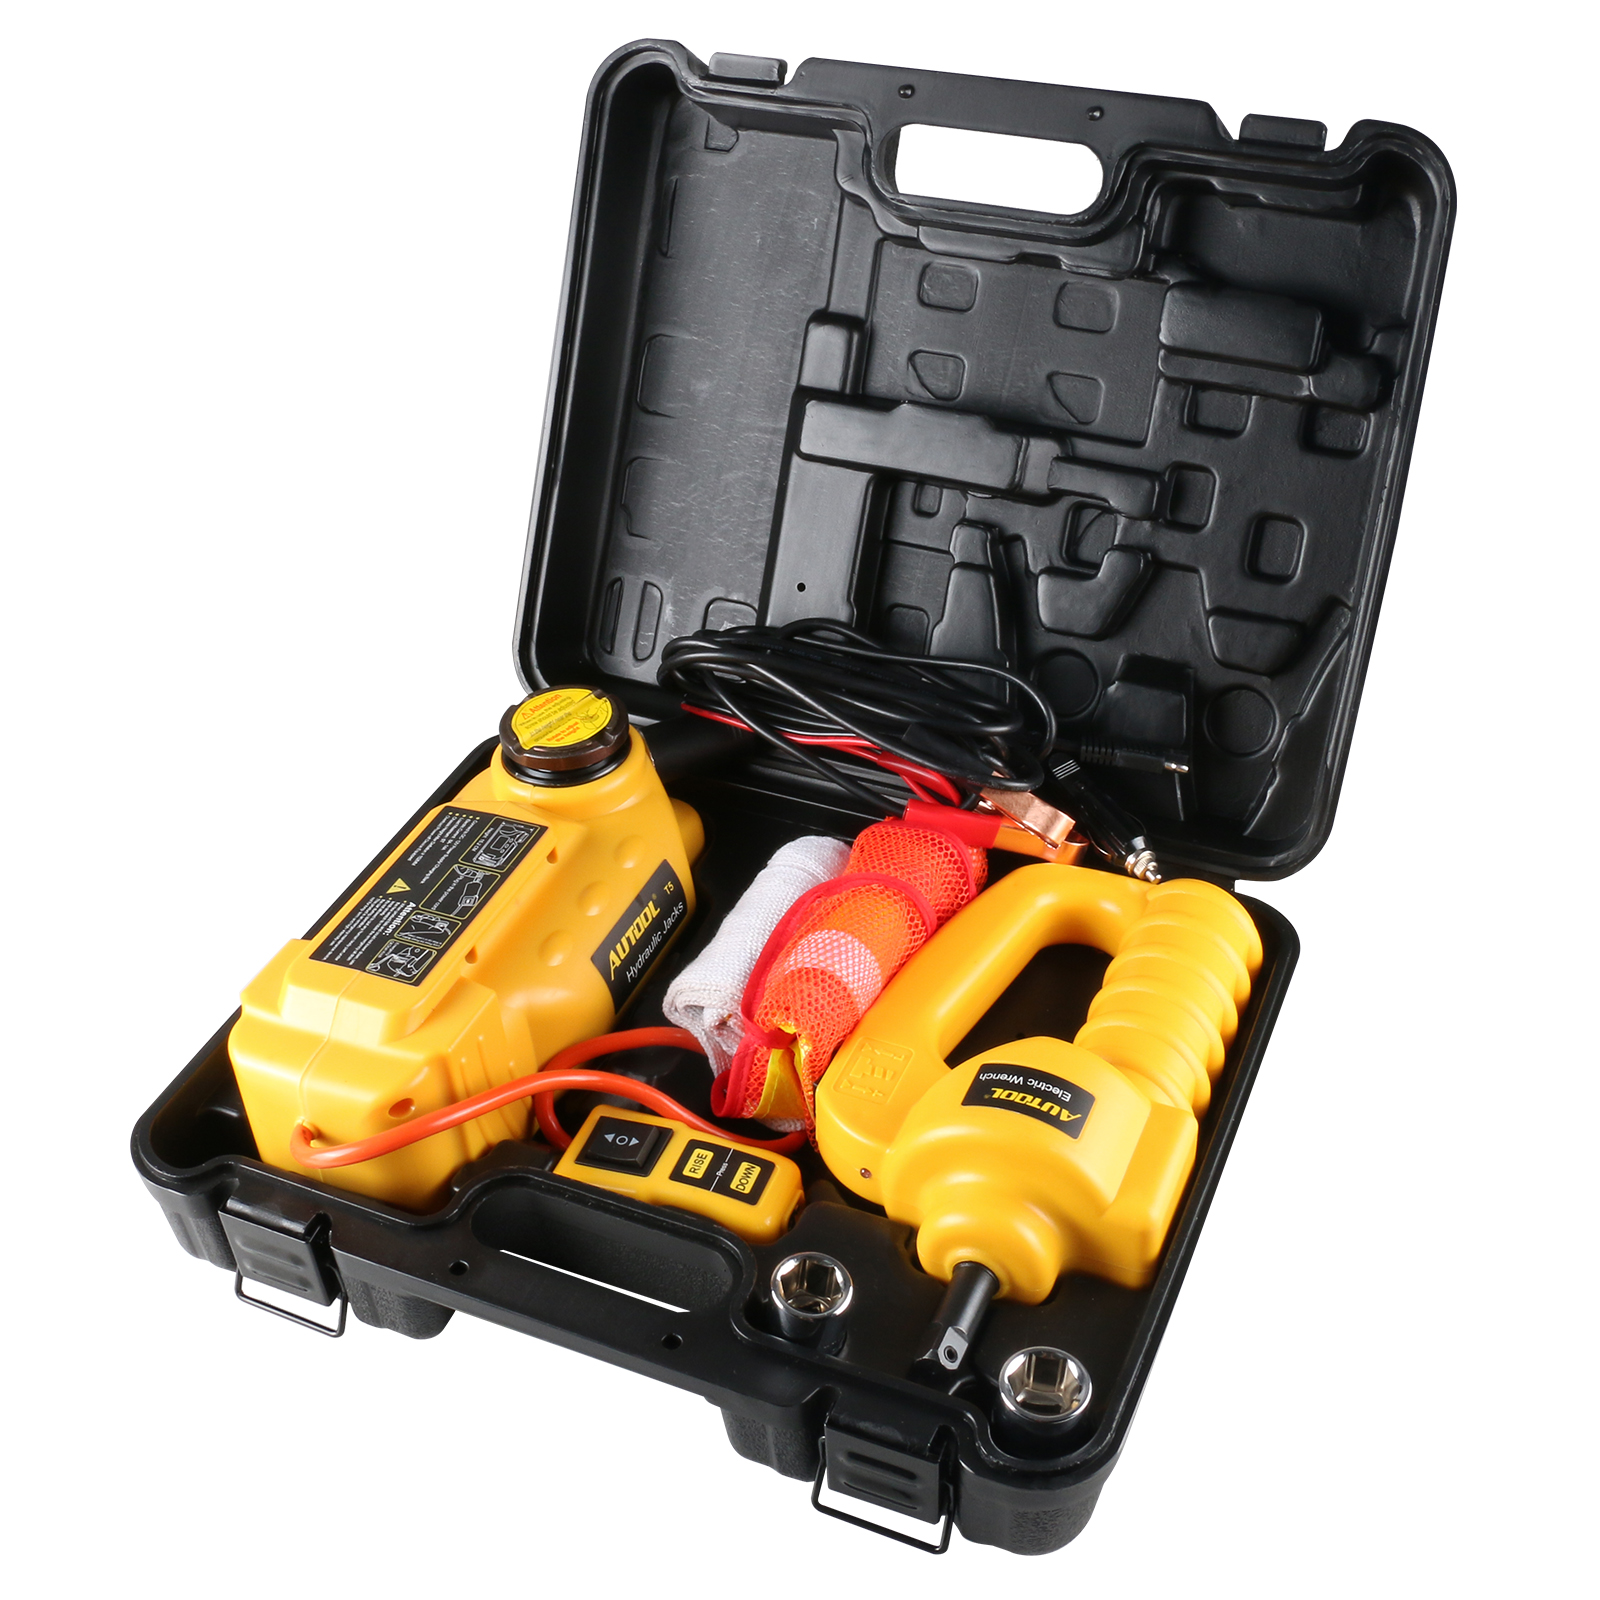 AUTOOL Car Jacks 5 Ton 12V Electric Hydraulic Jack Car lifting Automotive Replace Emergency Equipment Tools with Electric Wrench